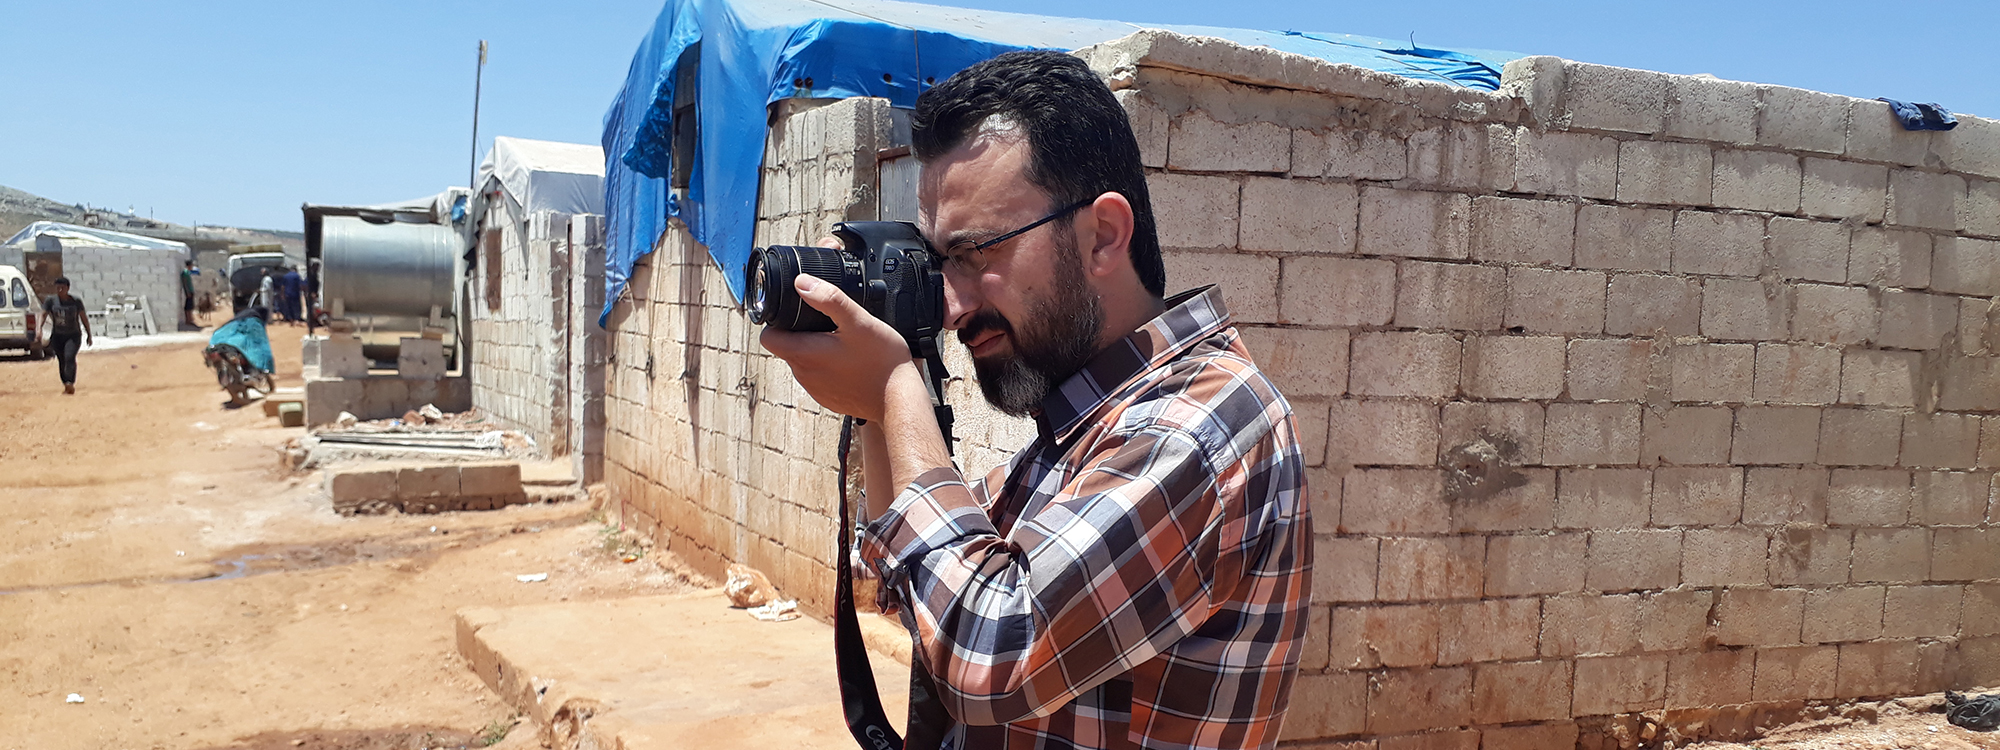 man holding a camera in a Syrian refugee camp